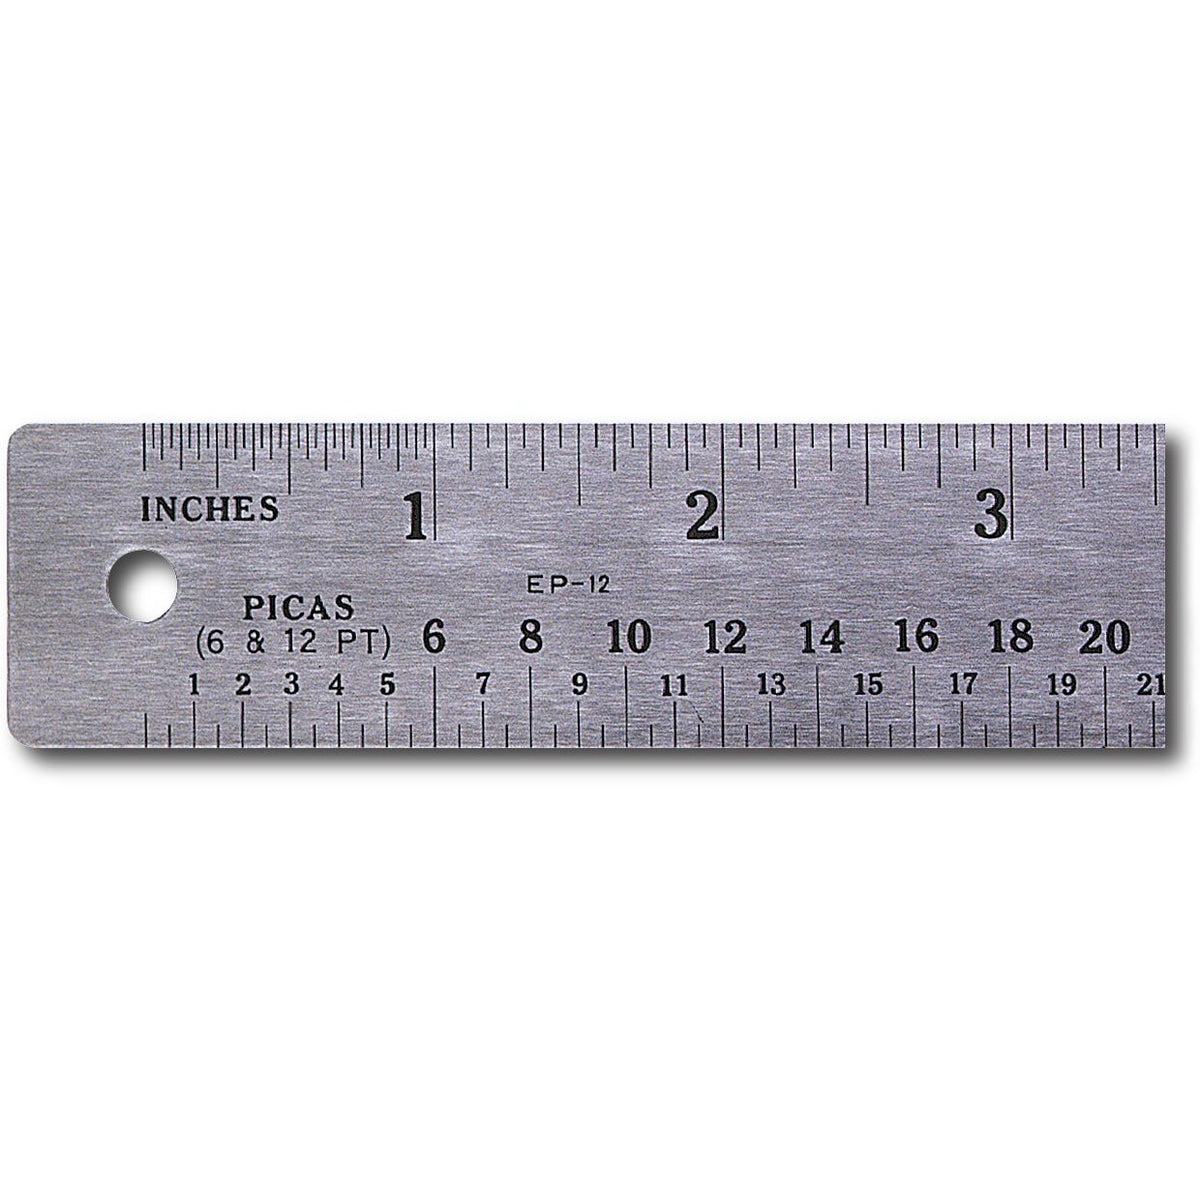 pica definition ruler